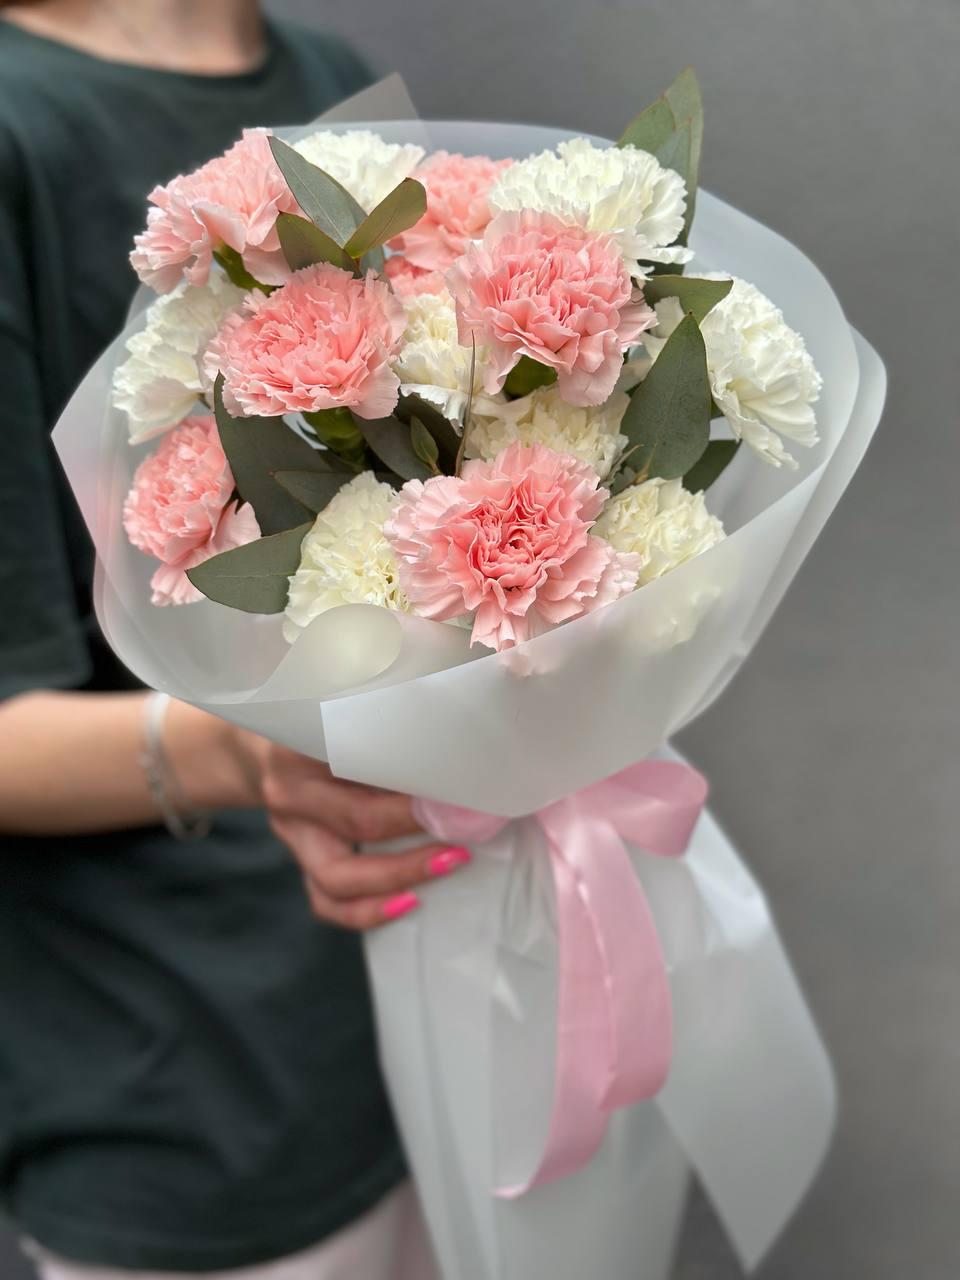 Bouquet of dianthus "Ricky"